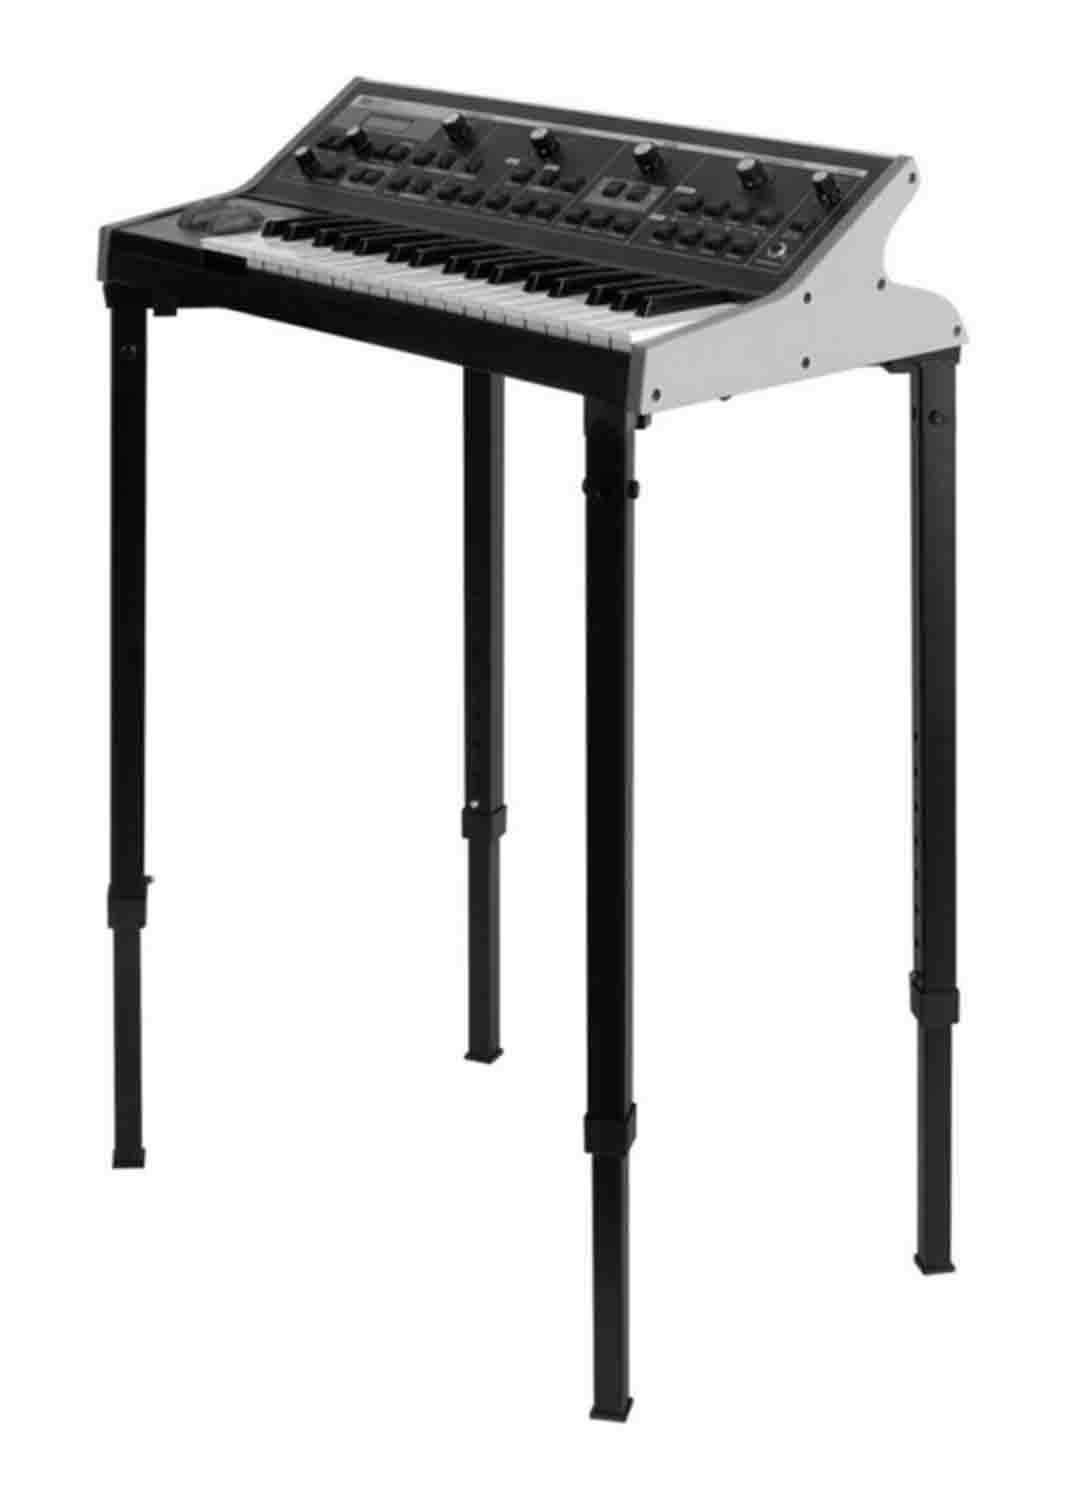 Onstage WS8540 Multi-Function Stand - Black - Hollywood DJ